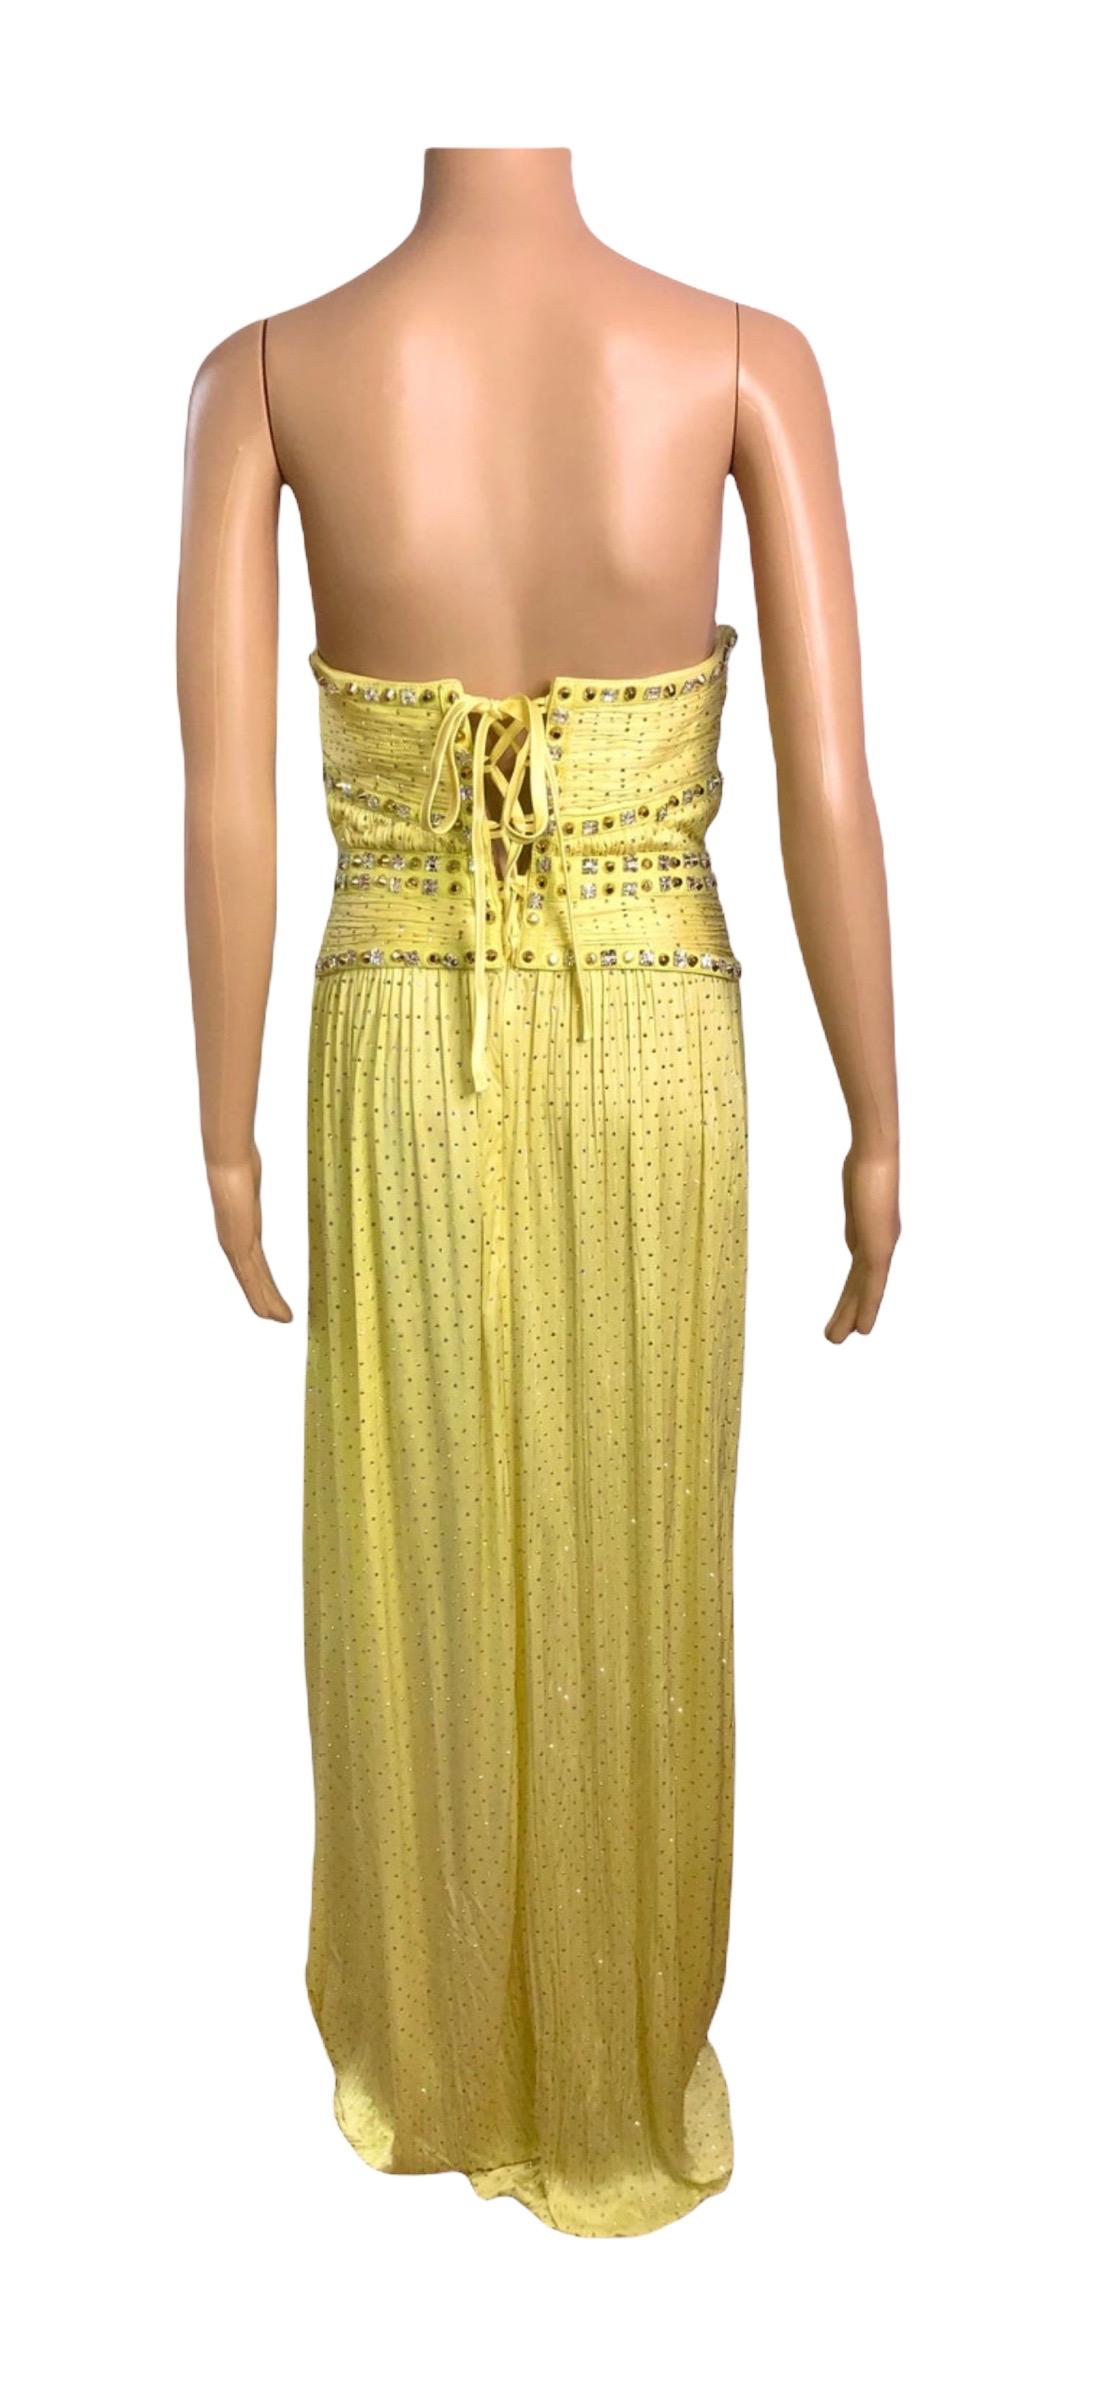 Versace S/S 2012 Runway Bustier Corset Crystal Embellished Evening Dress Gown  For Sale 11